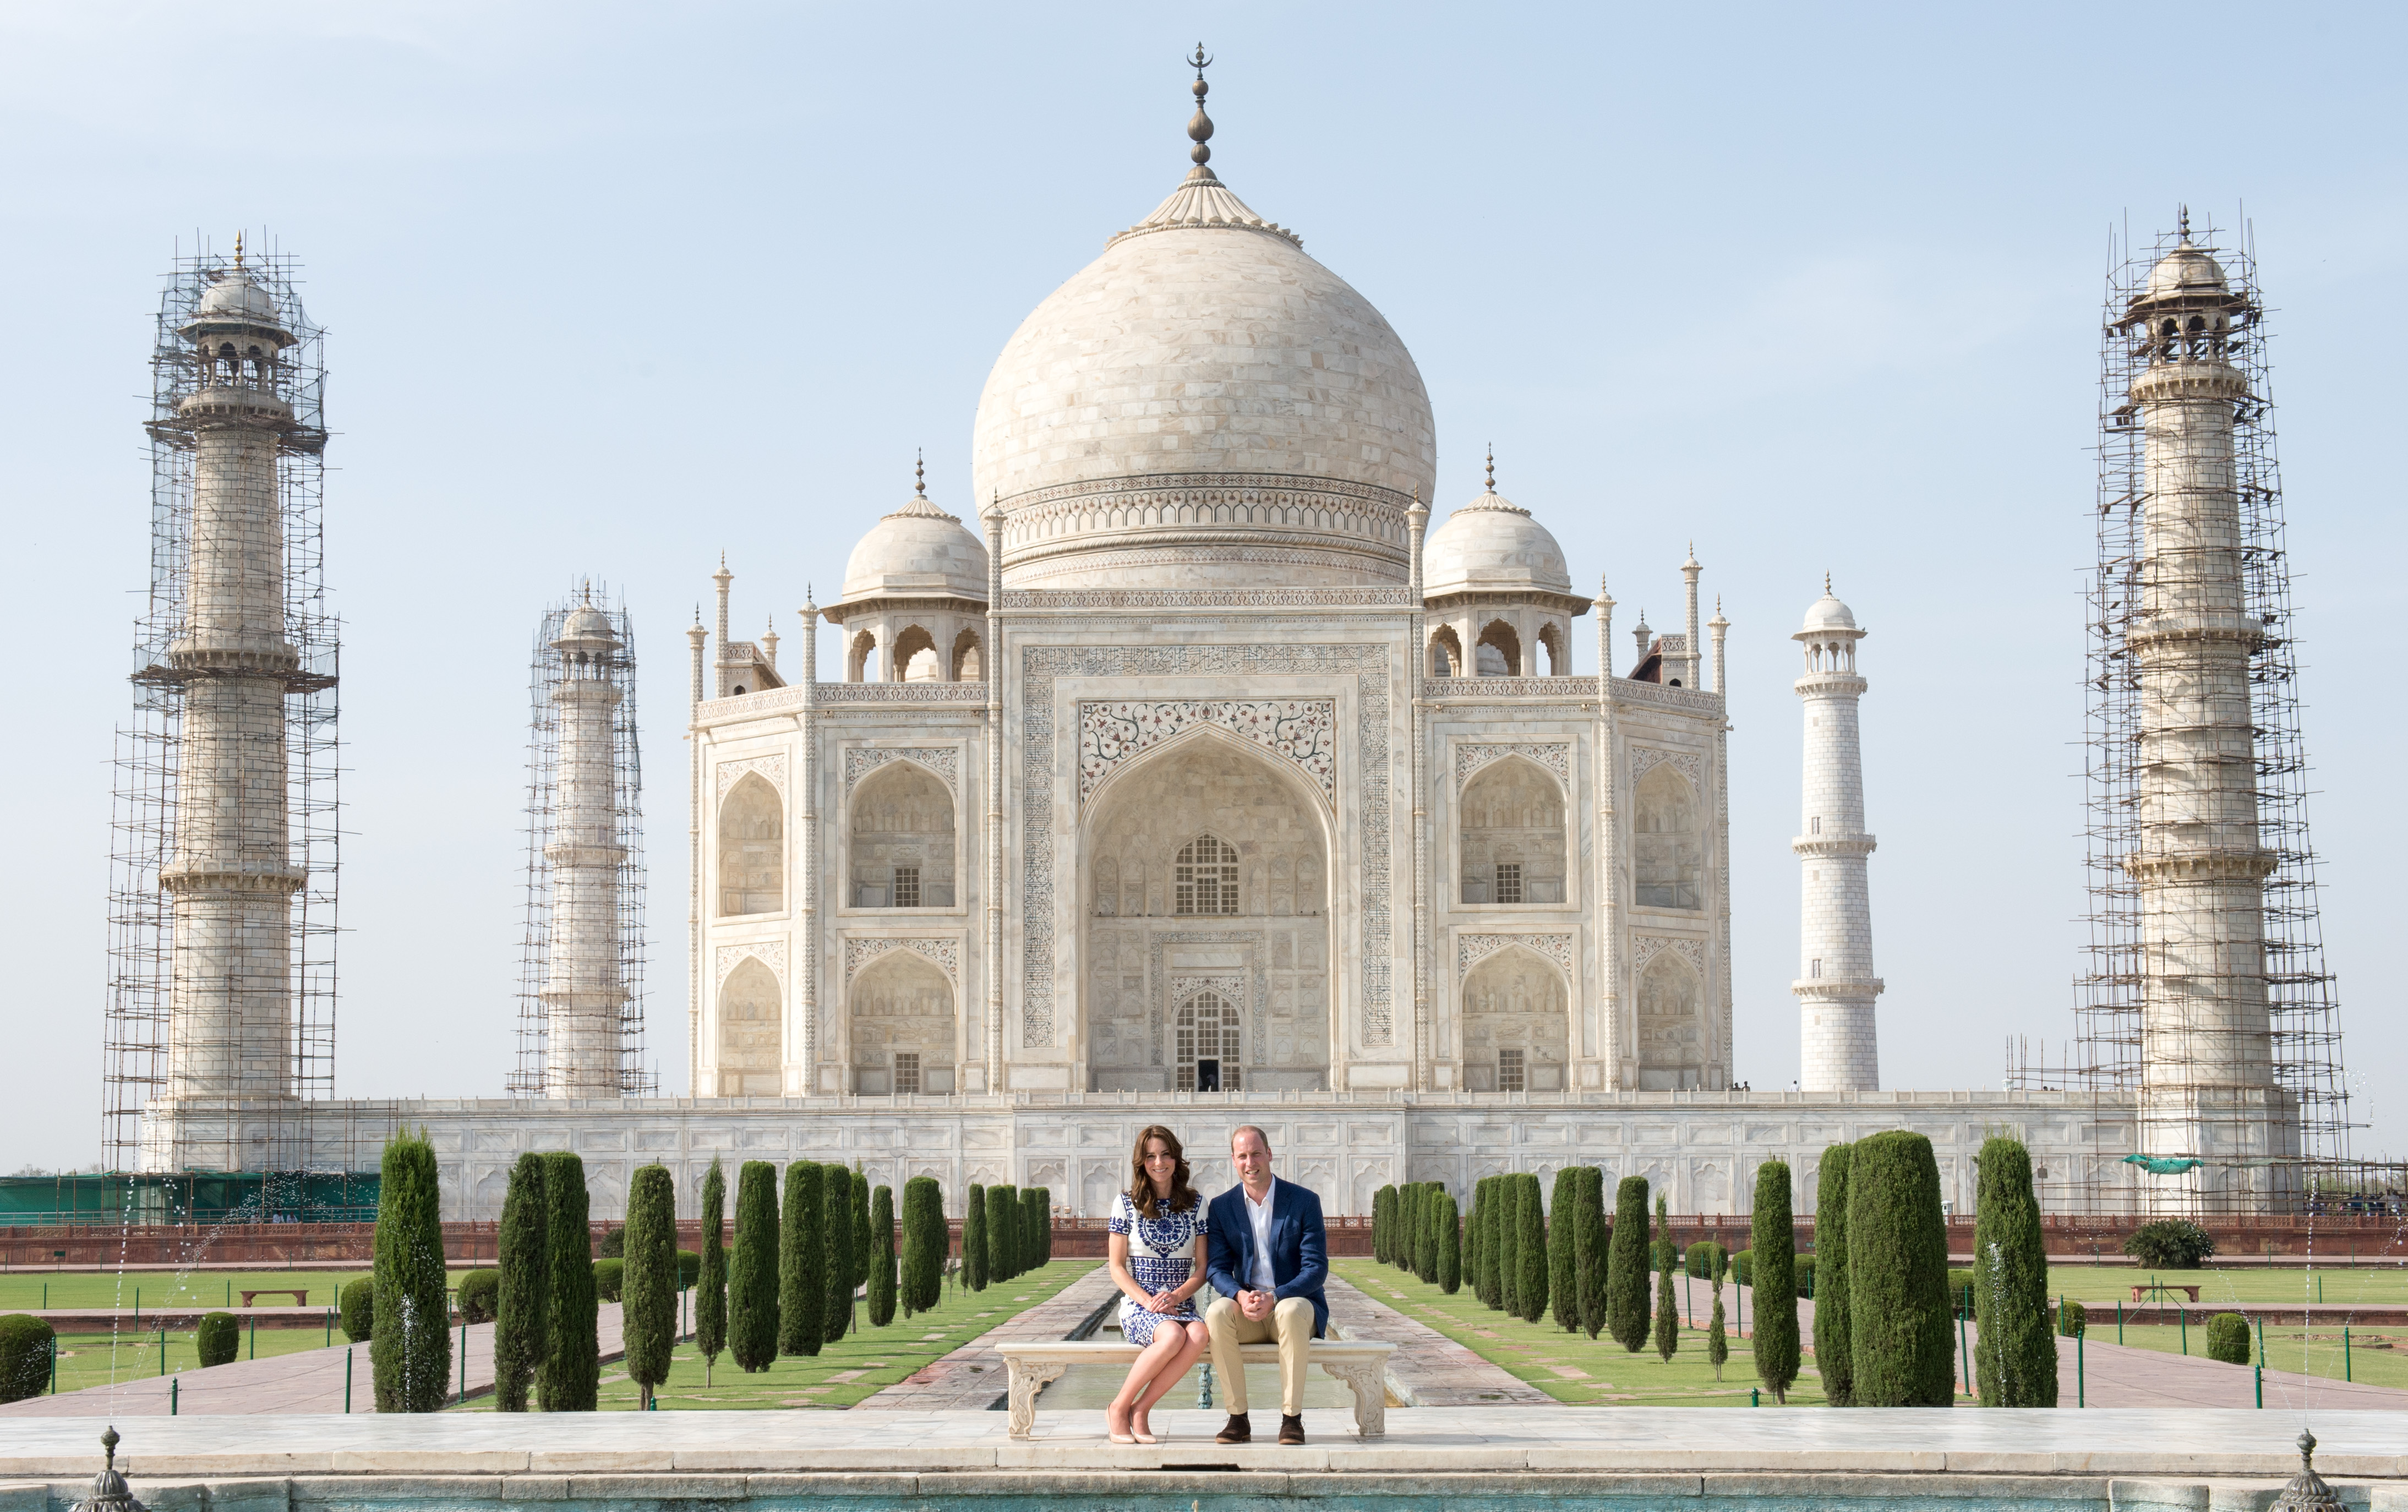 Prince William and Kate Middleton photographed sitting in front of the Taj Mahal during their visit to Agra, India